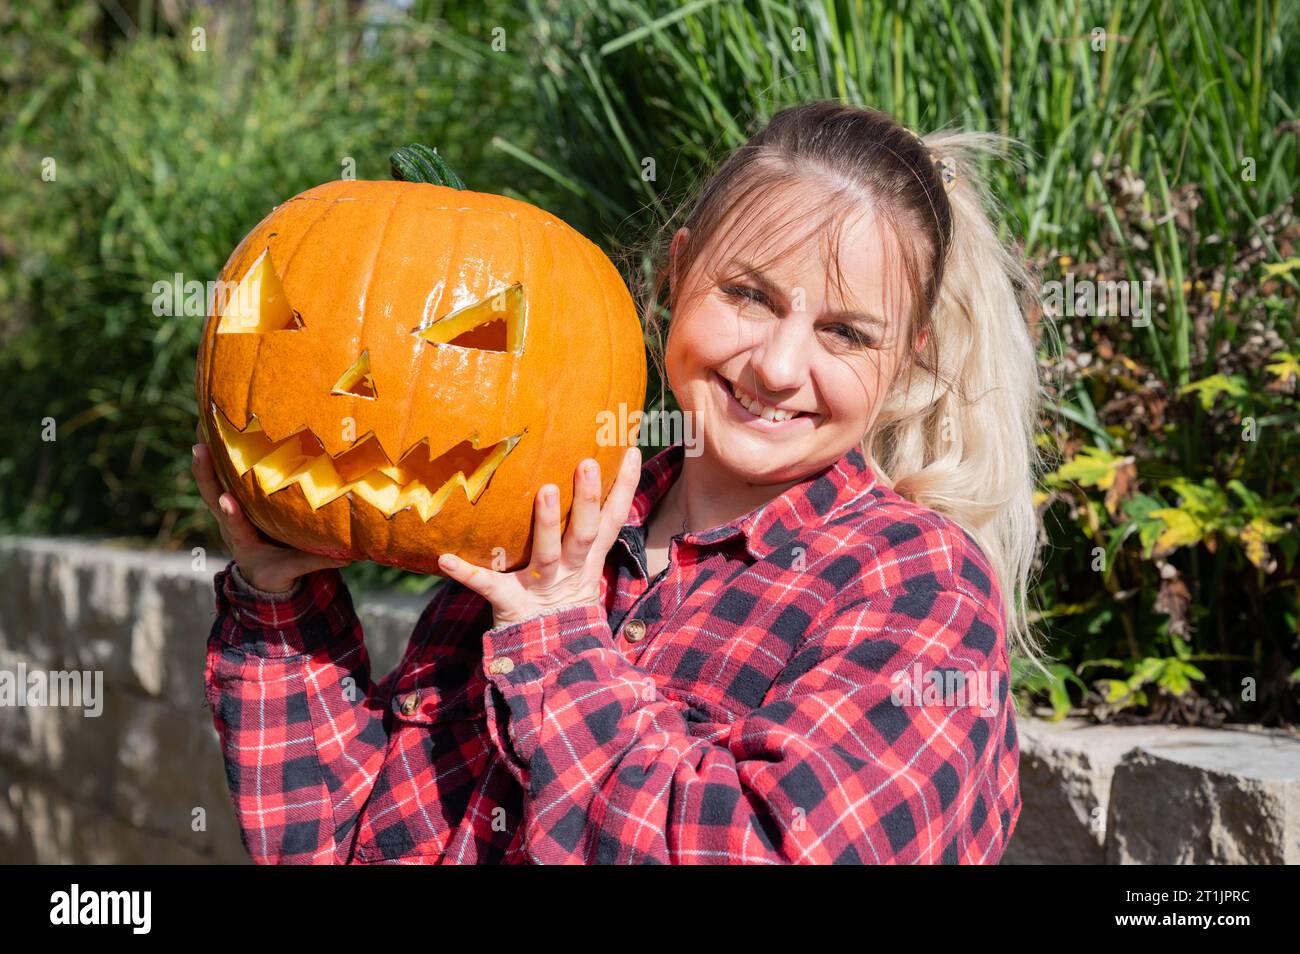 Blonde woman in the garden presents a self-carved pumpkin with face as decoration for Halloween time Stock Photo